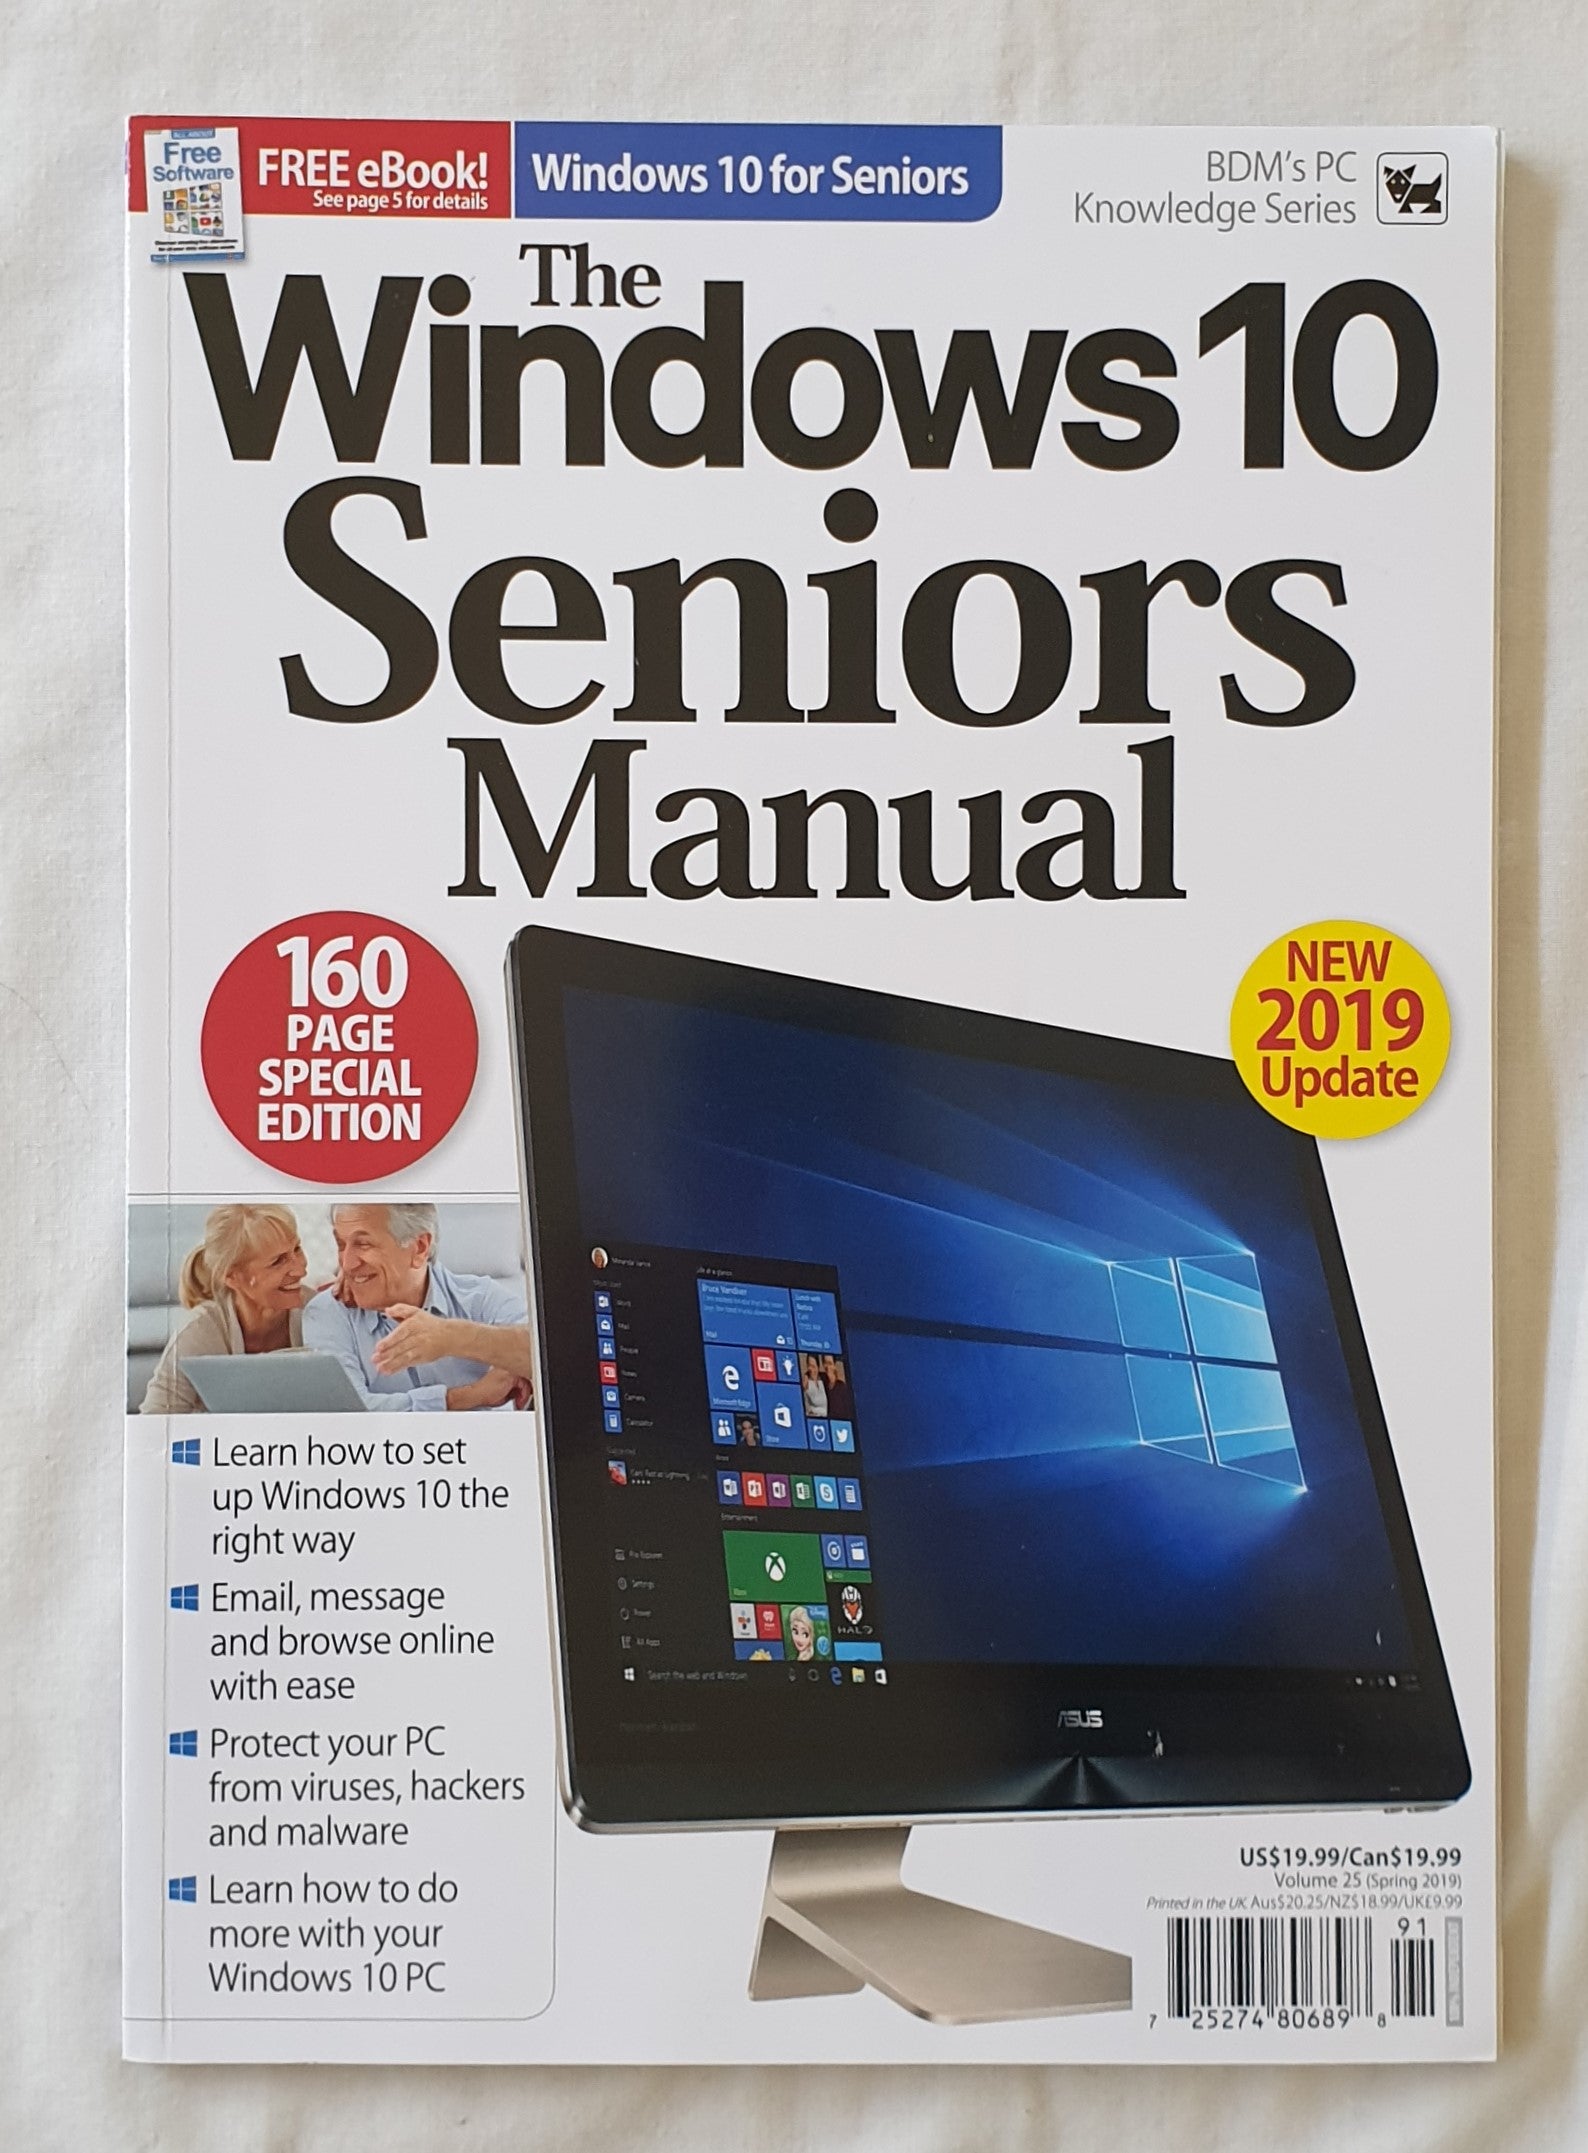 The Windows 10 Seniors Manual  BDM’s PC Knowledge Series  Volume 25  Edited by Russ Ware